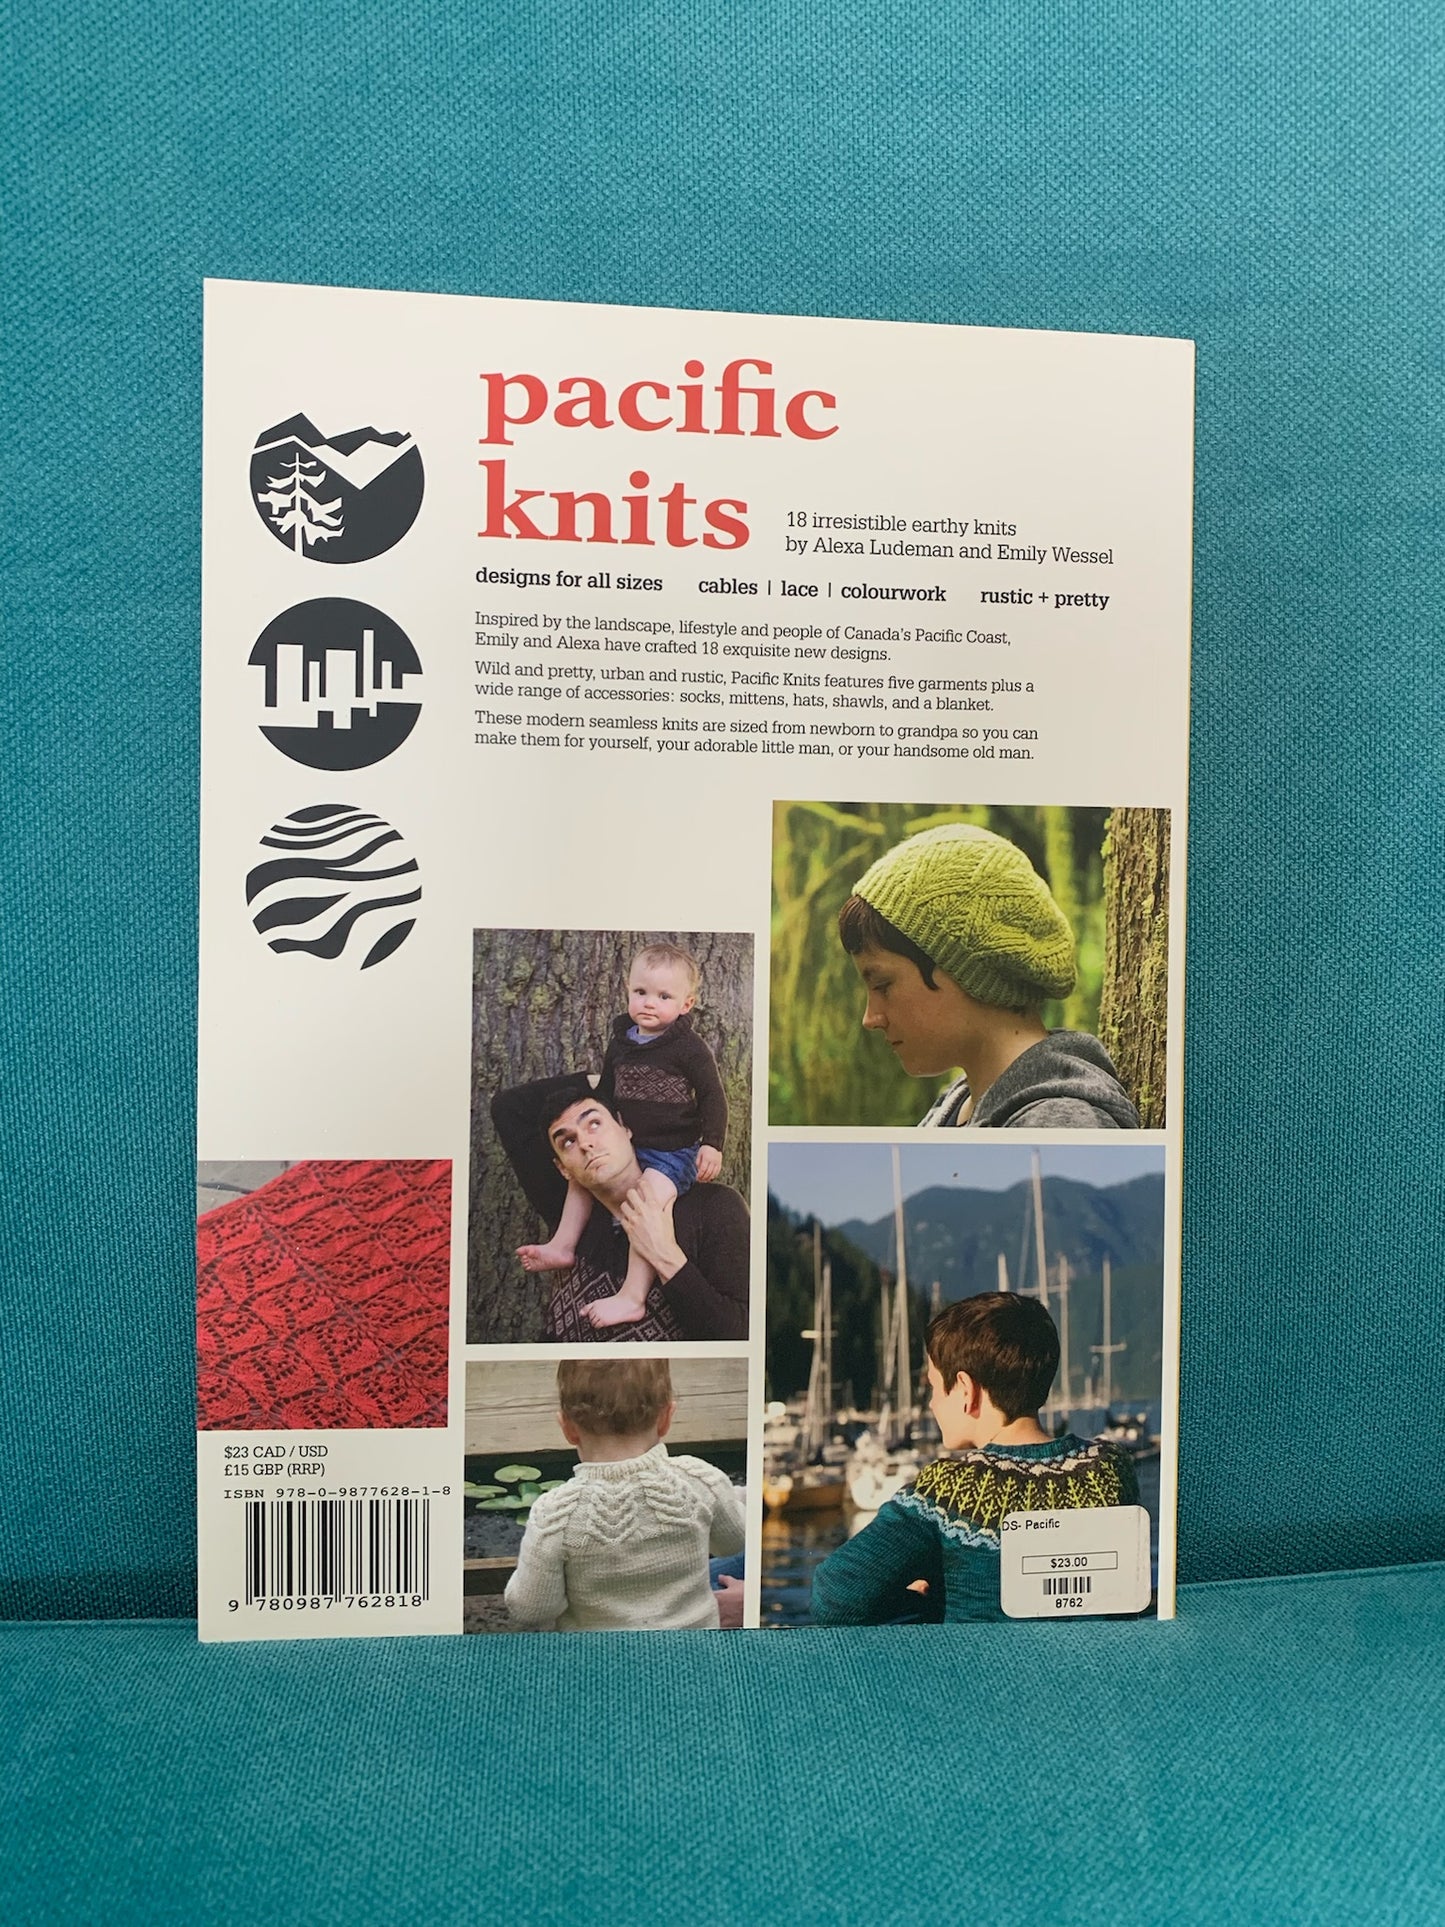 Pacific Knits - Alexa Ludeman and Emily Wessel